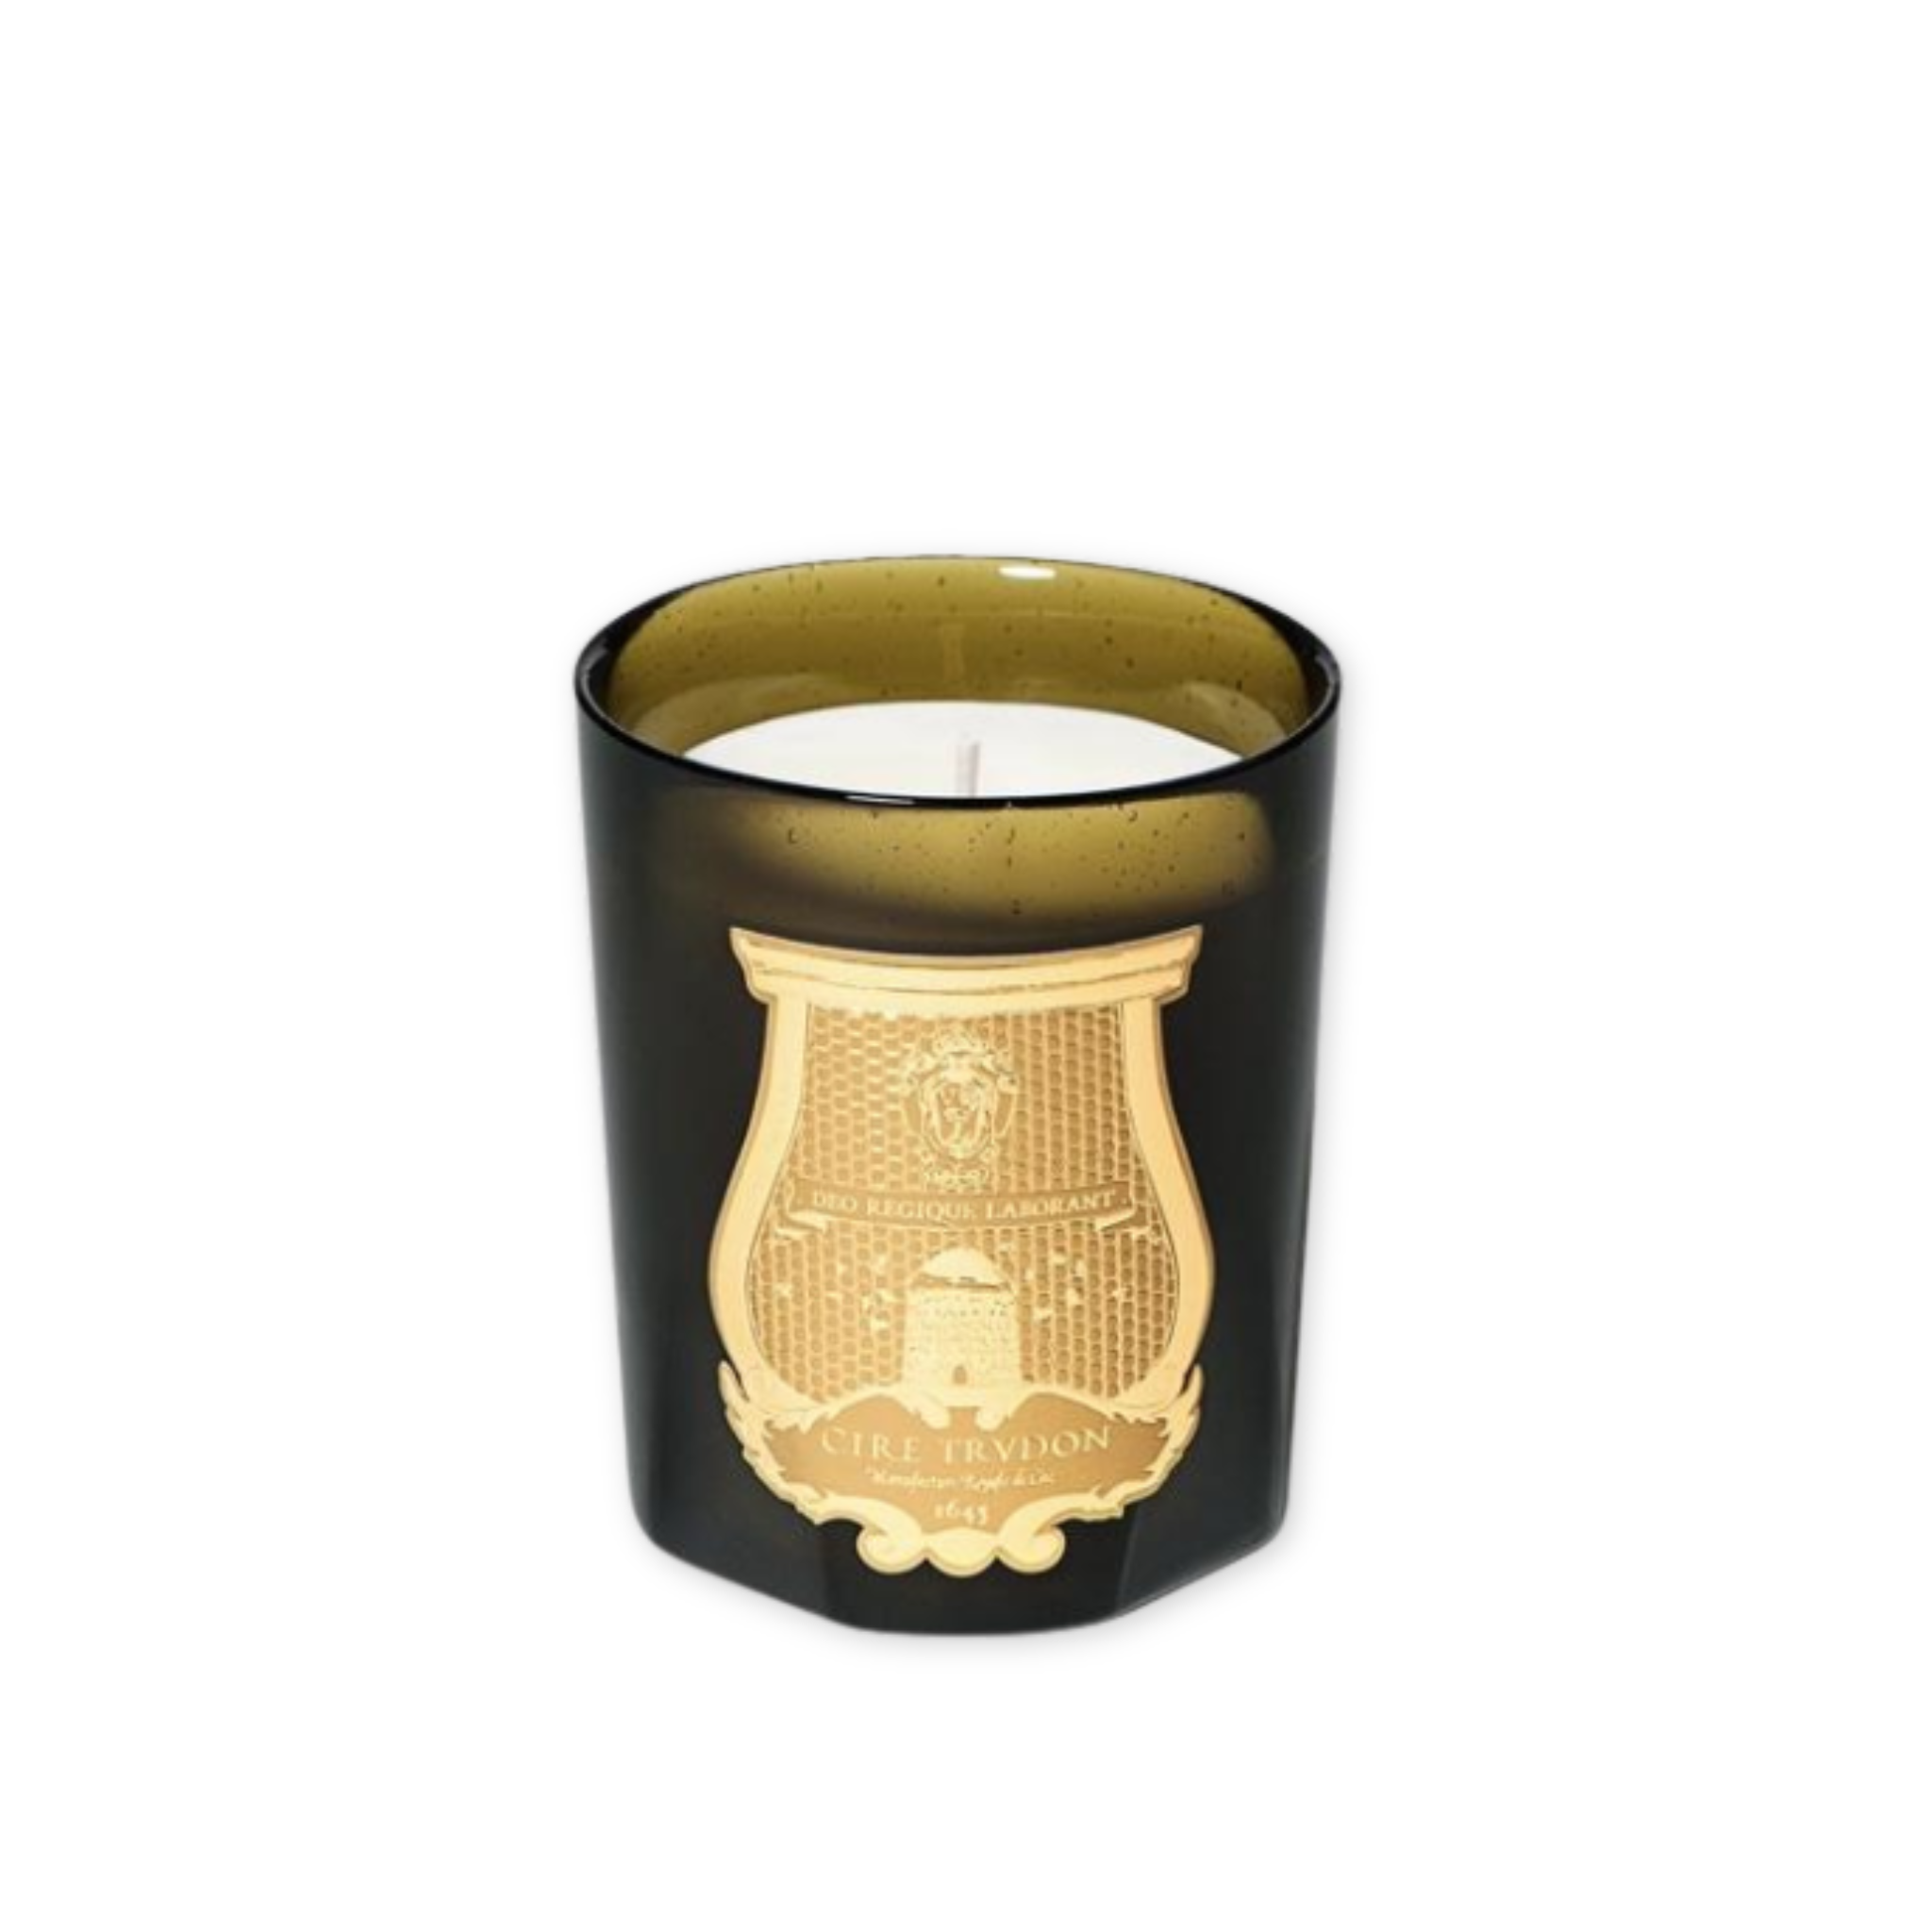 leather tobacco rose and jasmine scented candle